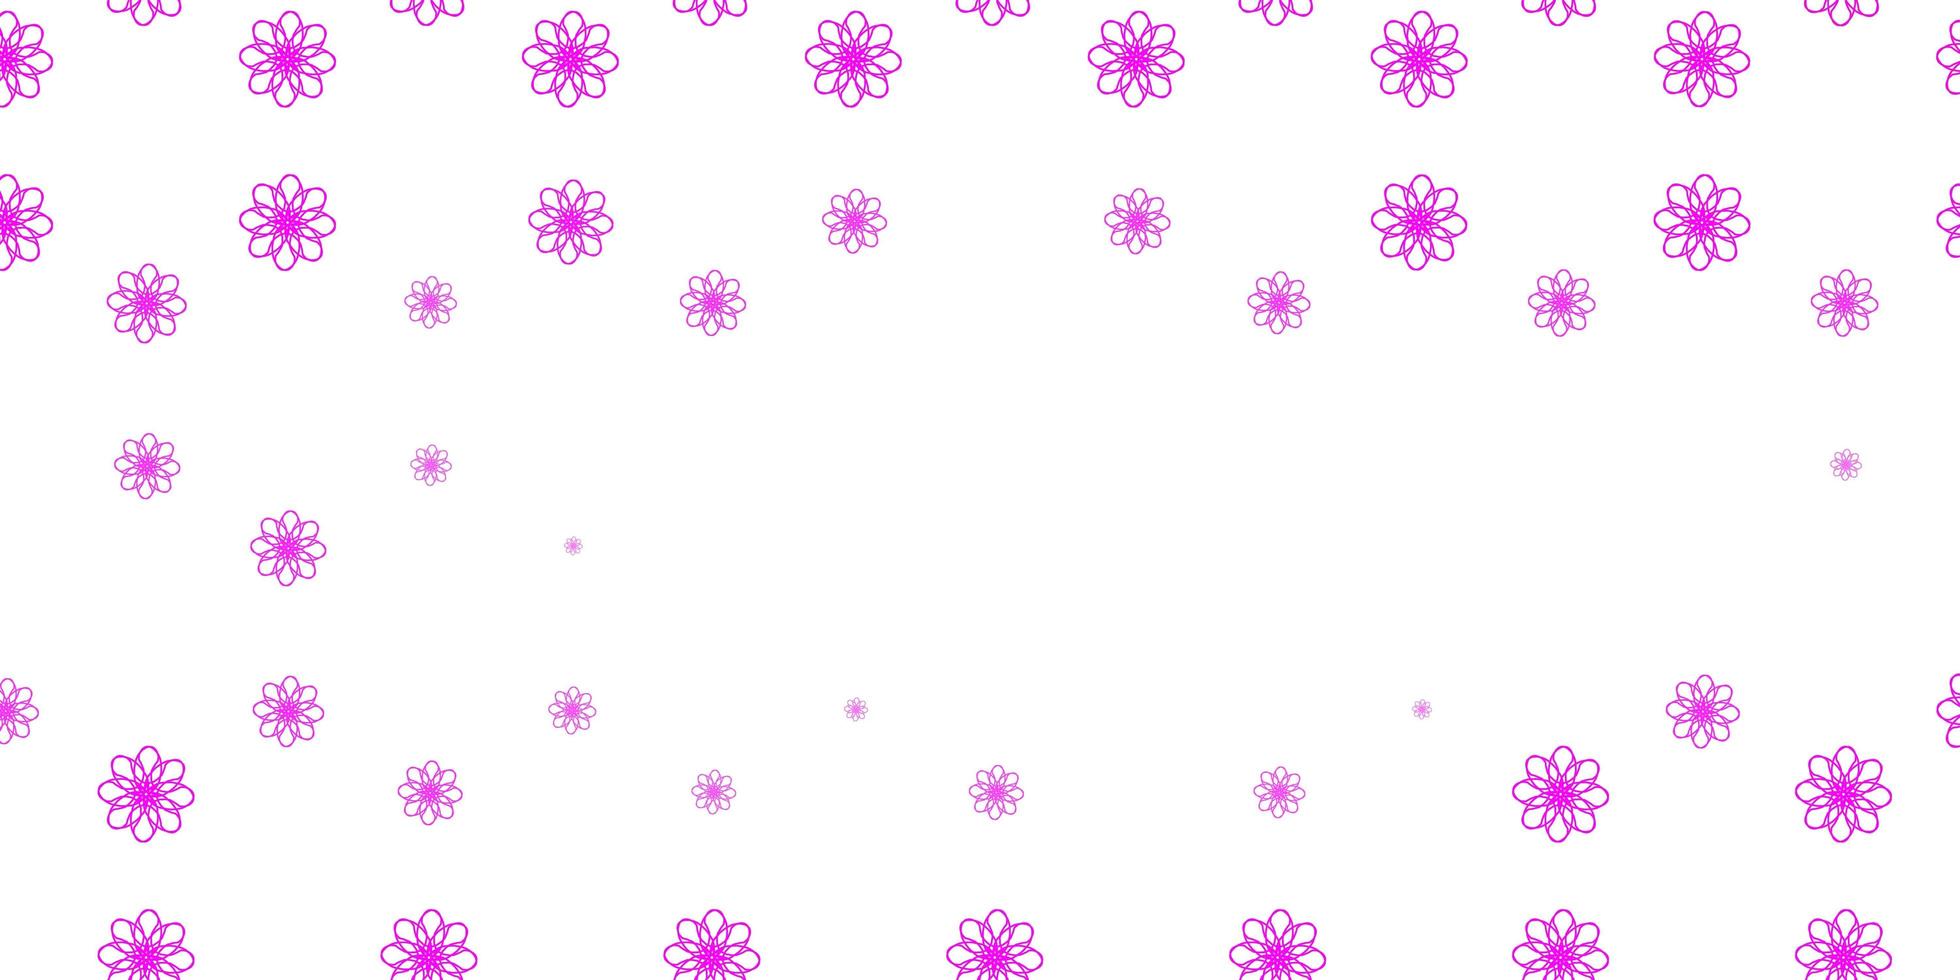 Light Pink vector background with wry lines.